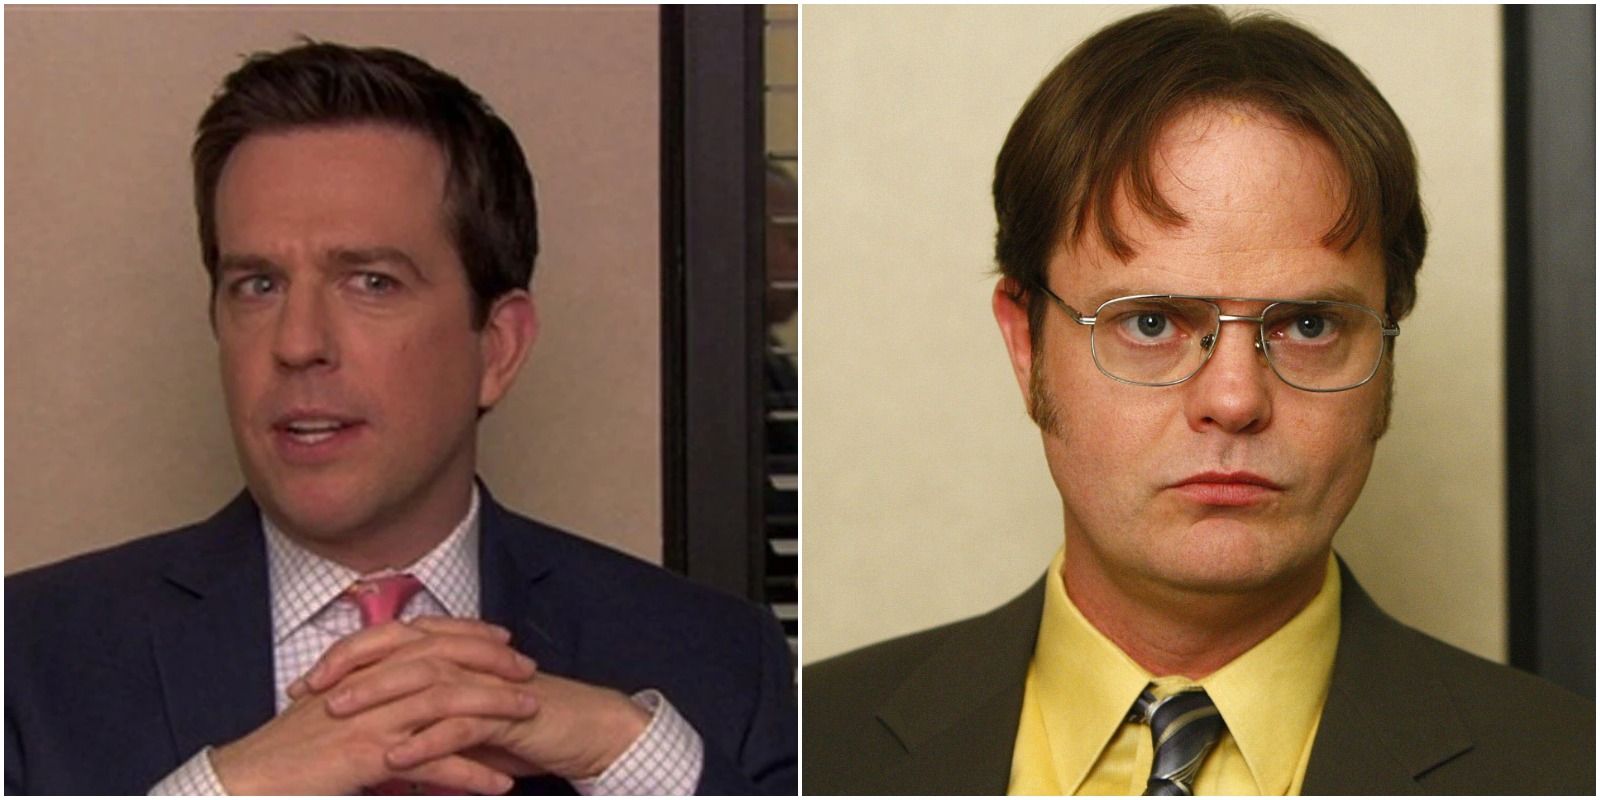 the office characters